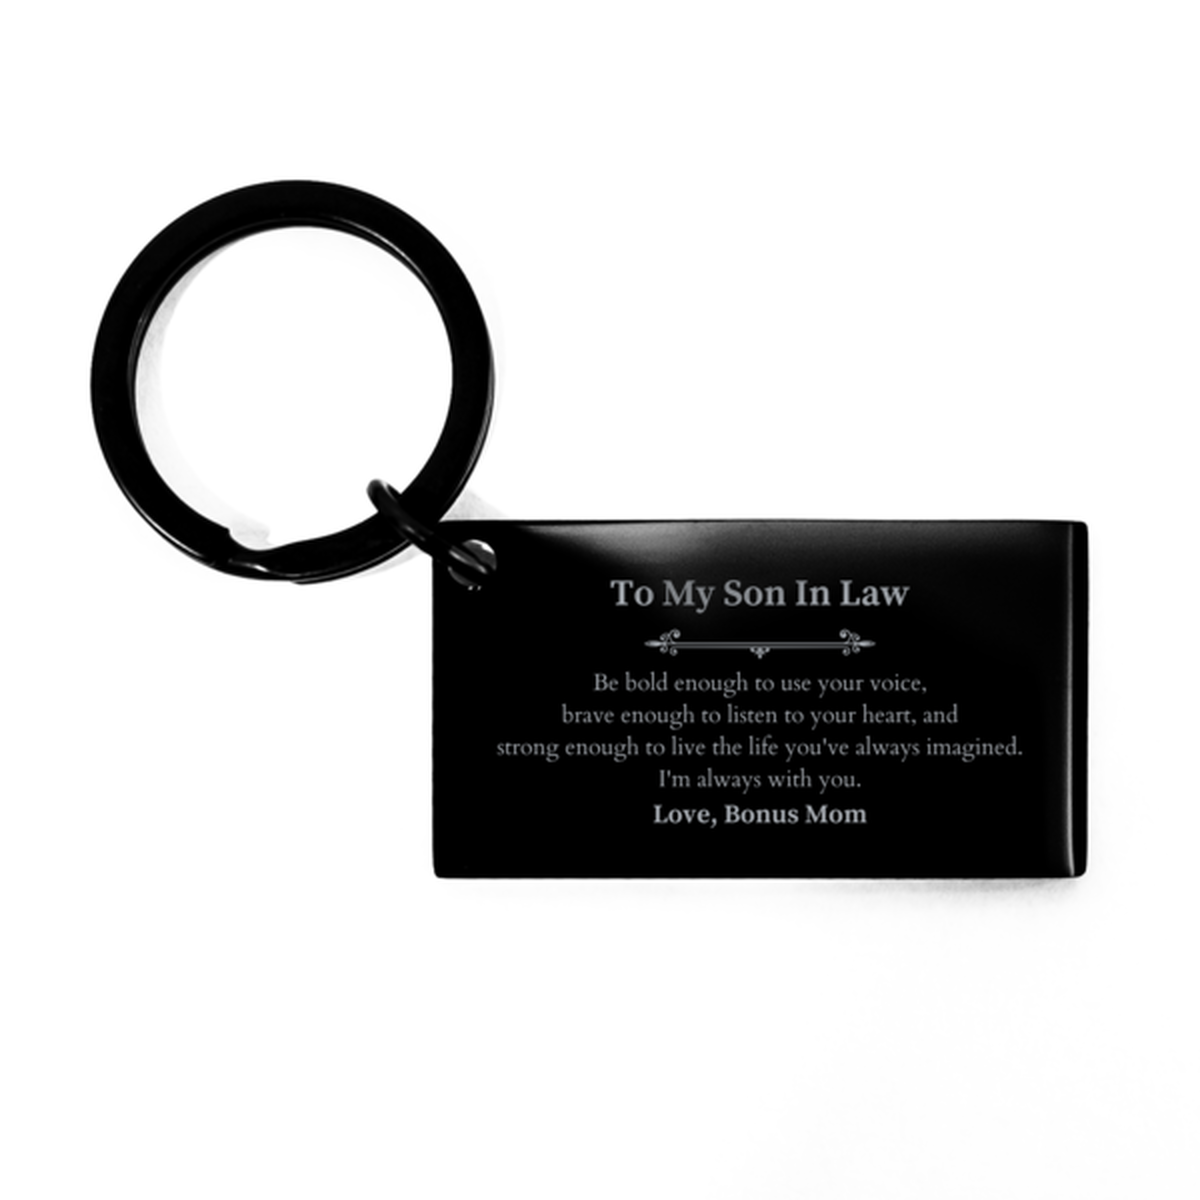 Keepsake Son In Law Keychain Gift Idea Graduation Christmas Birthday Son In Law from Bonus Mom, Son In Law Be bold enough to use your voice, brave enough to listen to your heart. Love, Bonus Mom